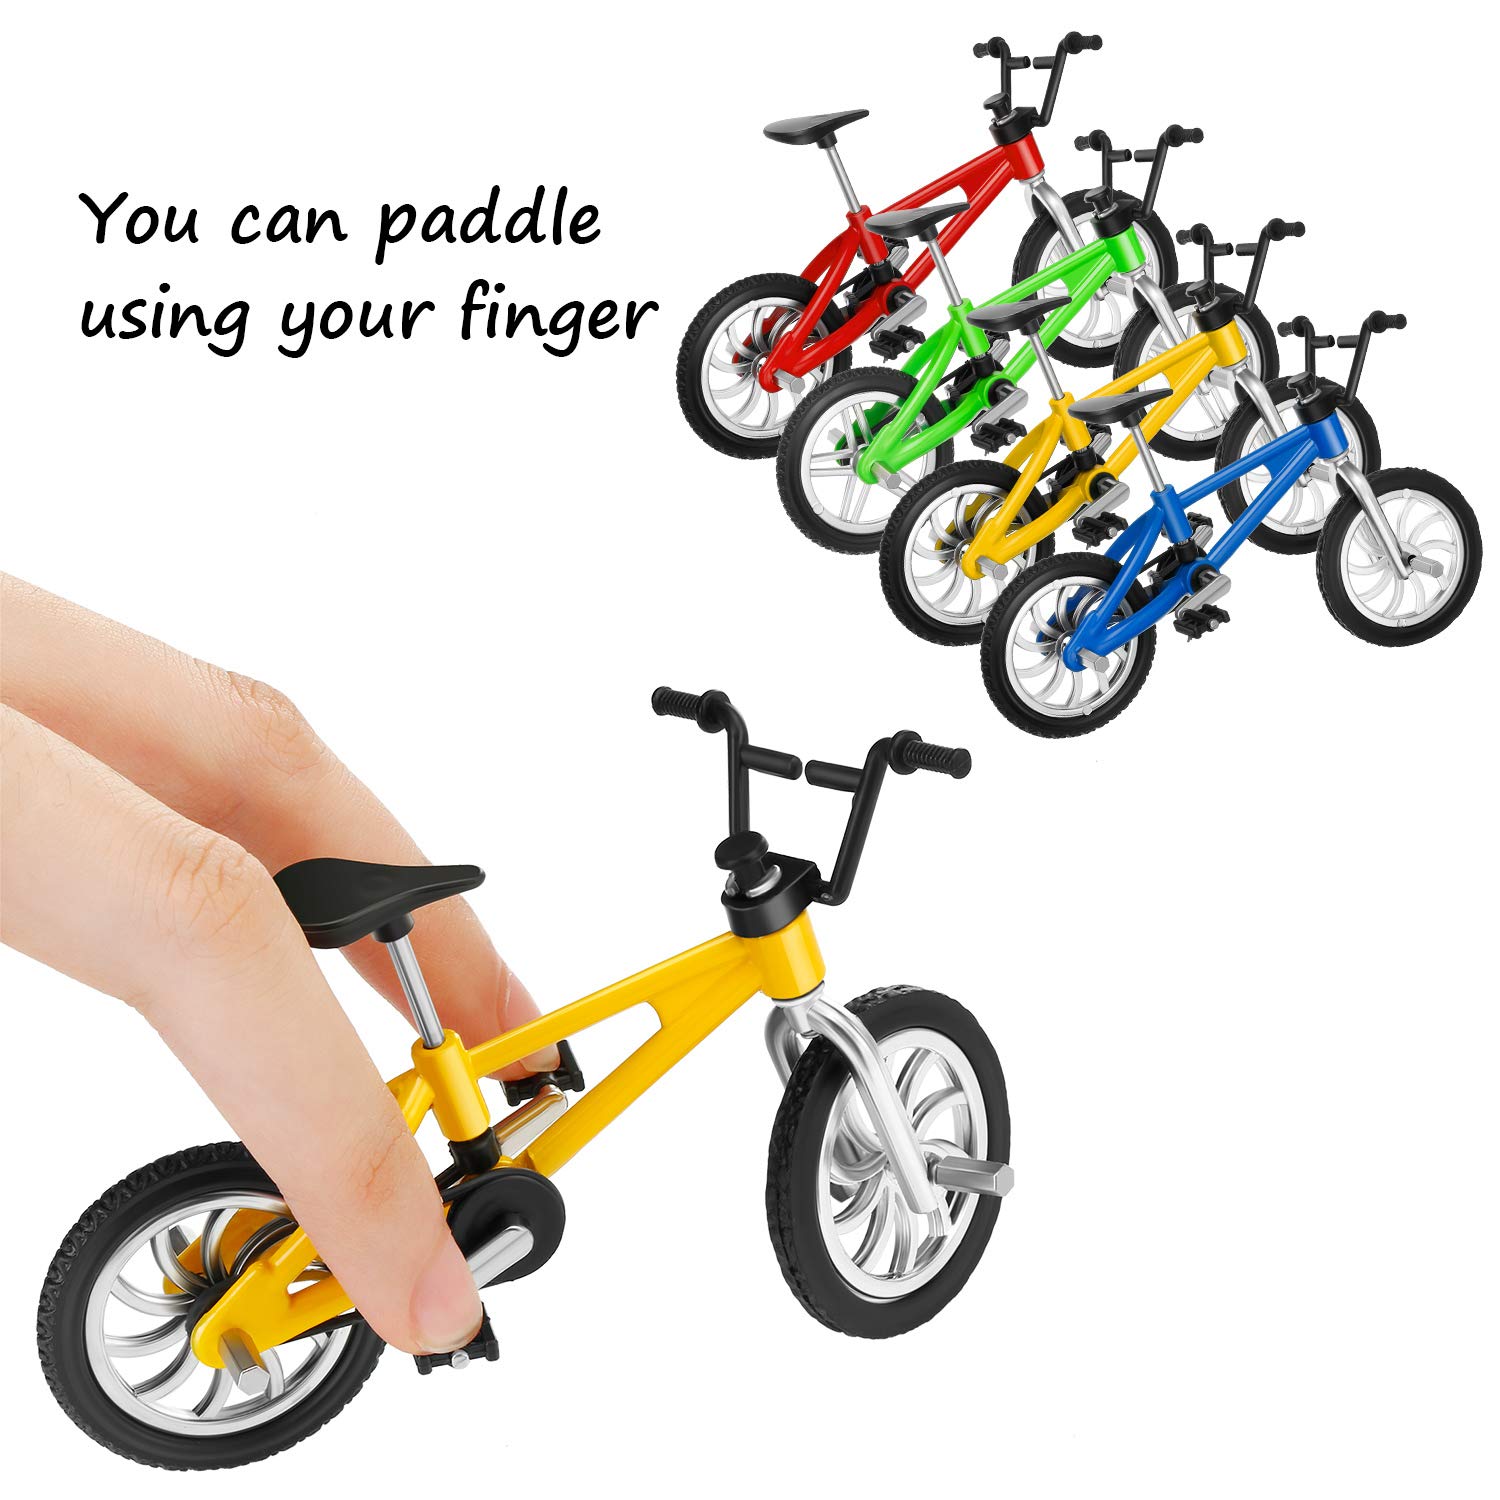 12 Pieces Finger Bikes Mini Extreme Sports Finger Bike Miniature Metal for Creative Game Favors Gifts